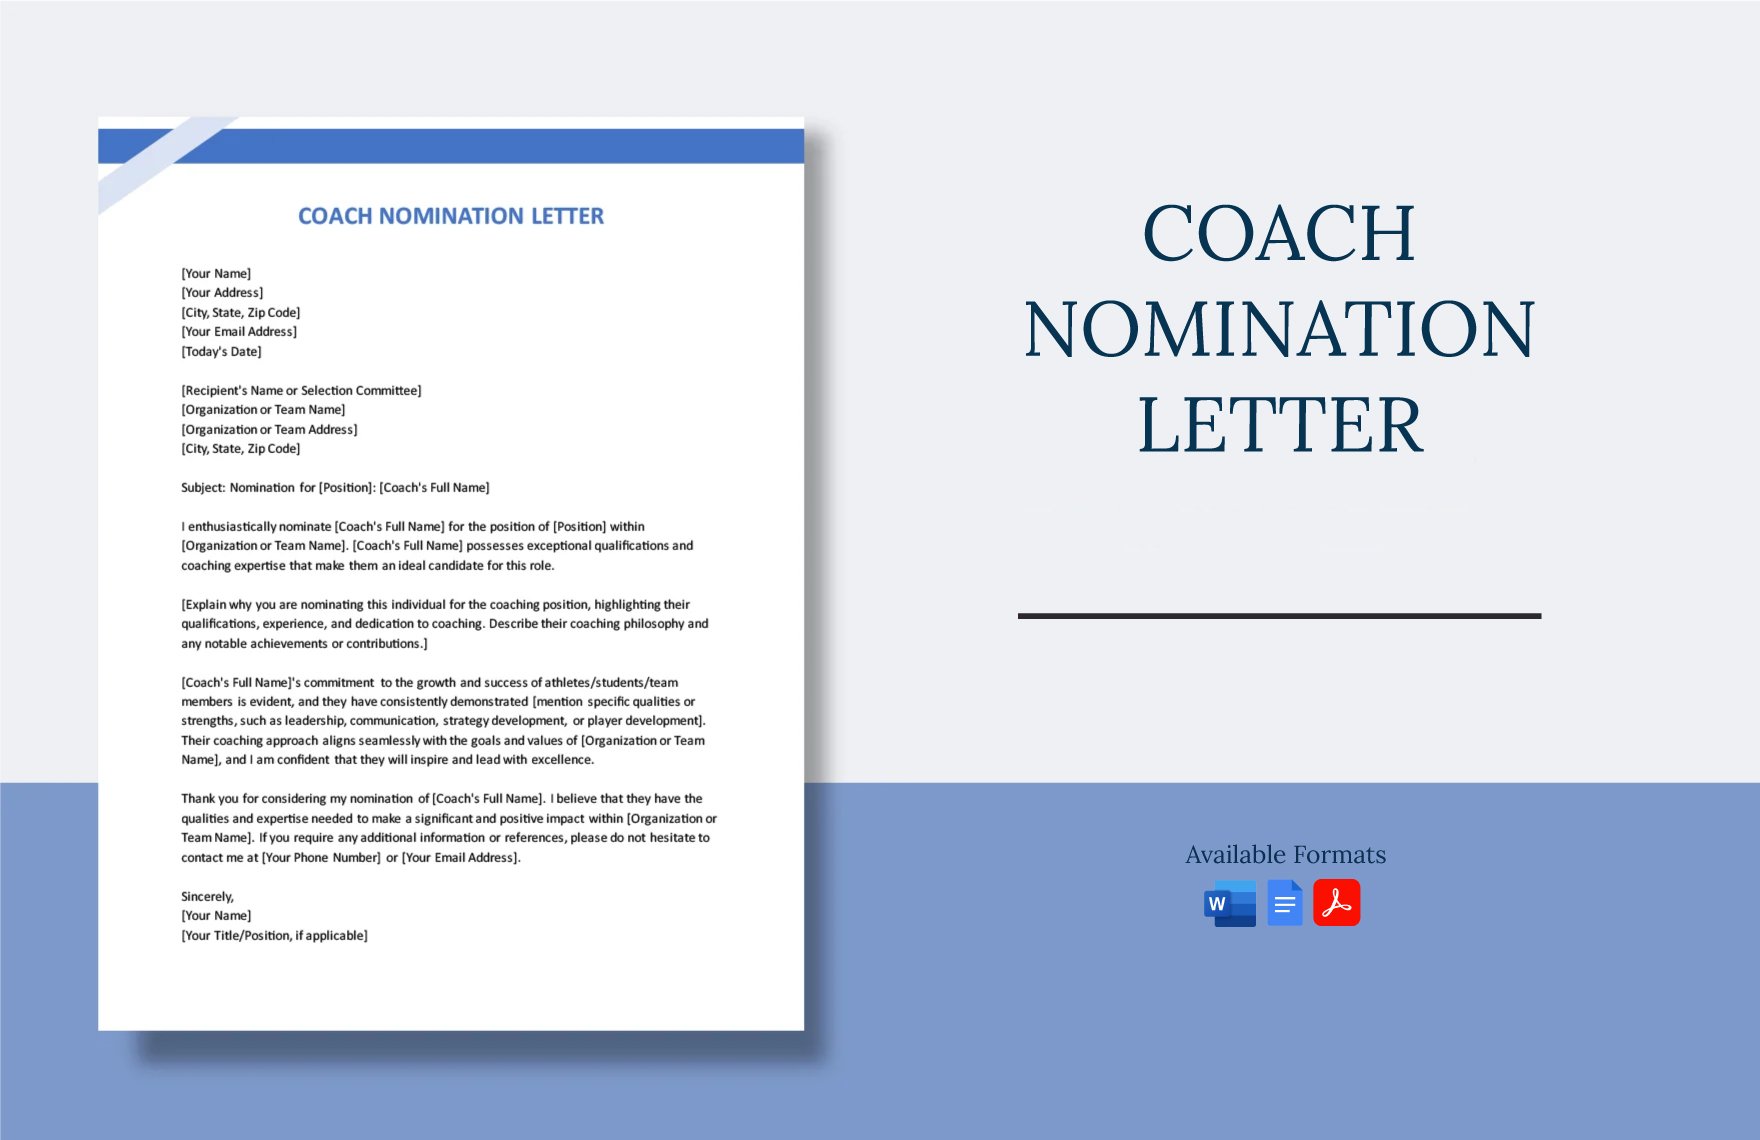 Coach Nomination Letter in Word, Google Docs, PDF